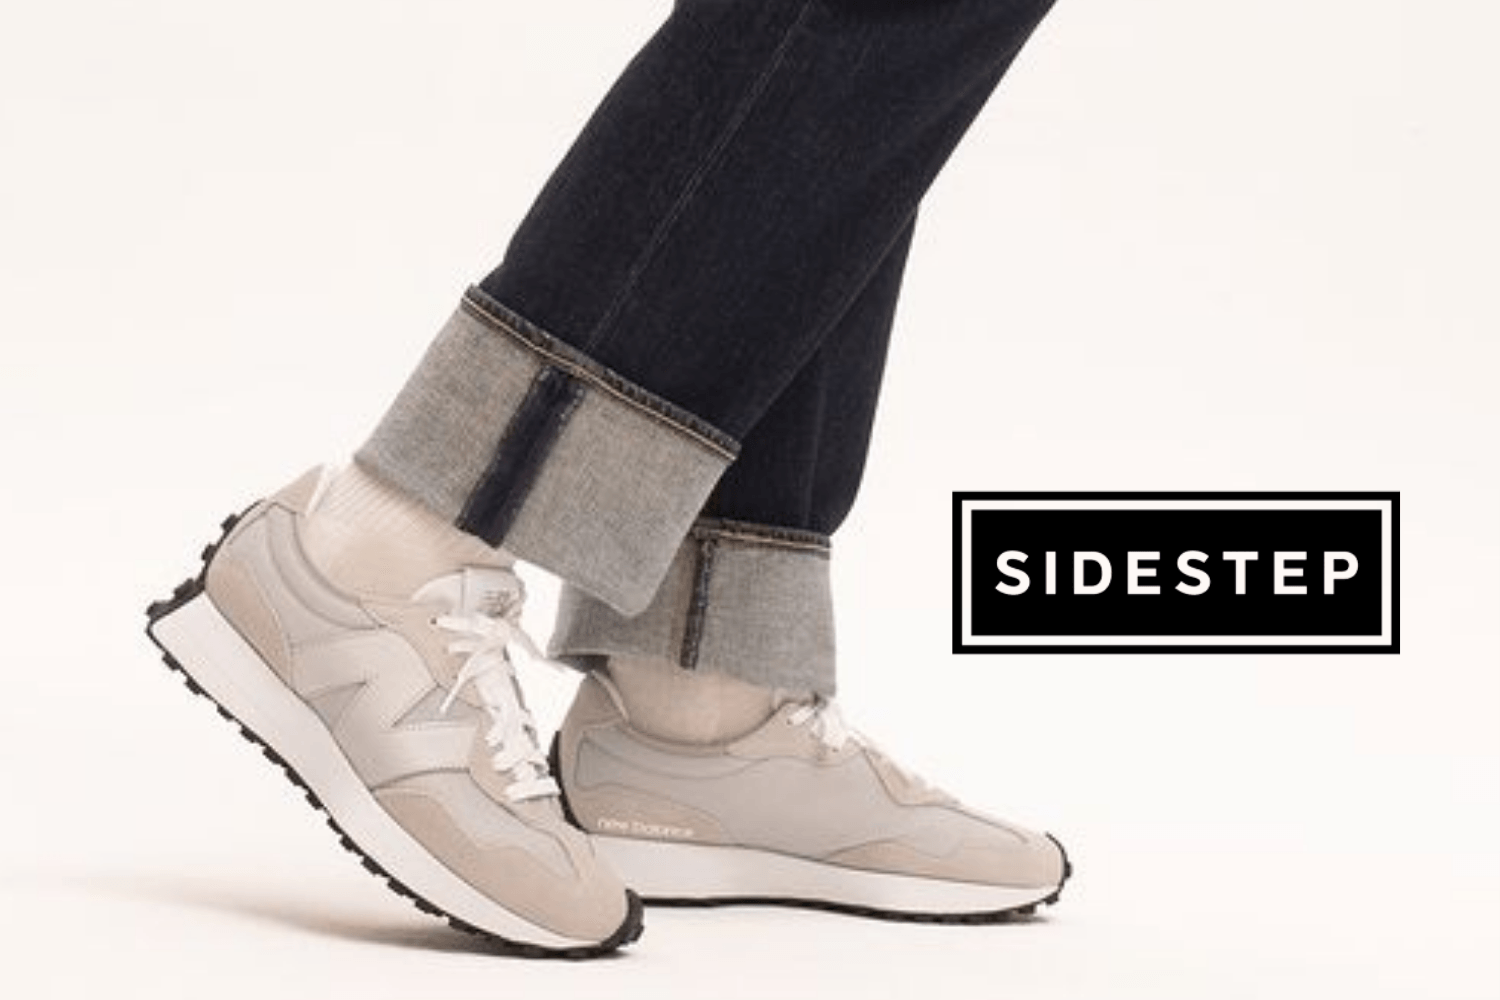 Sidestep comes with high discounts in Winter Sale